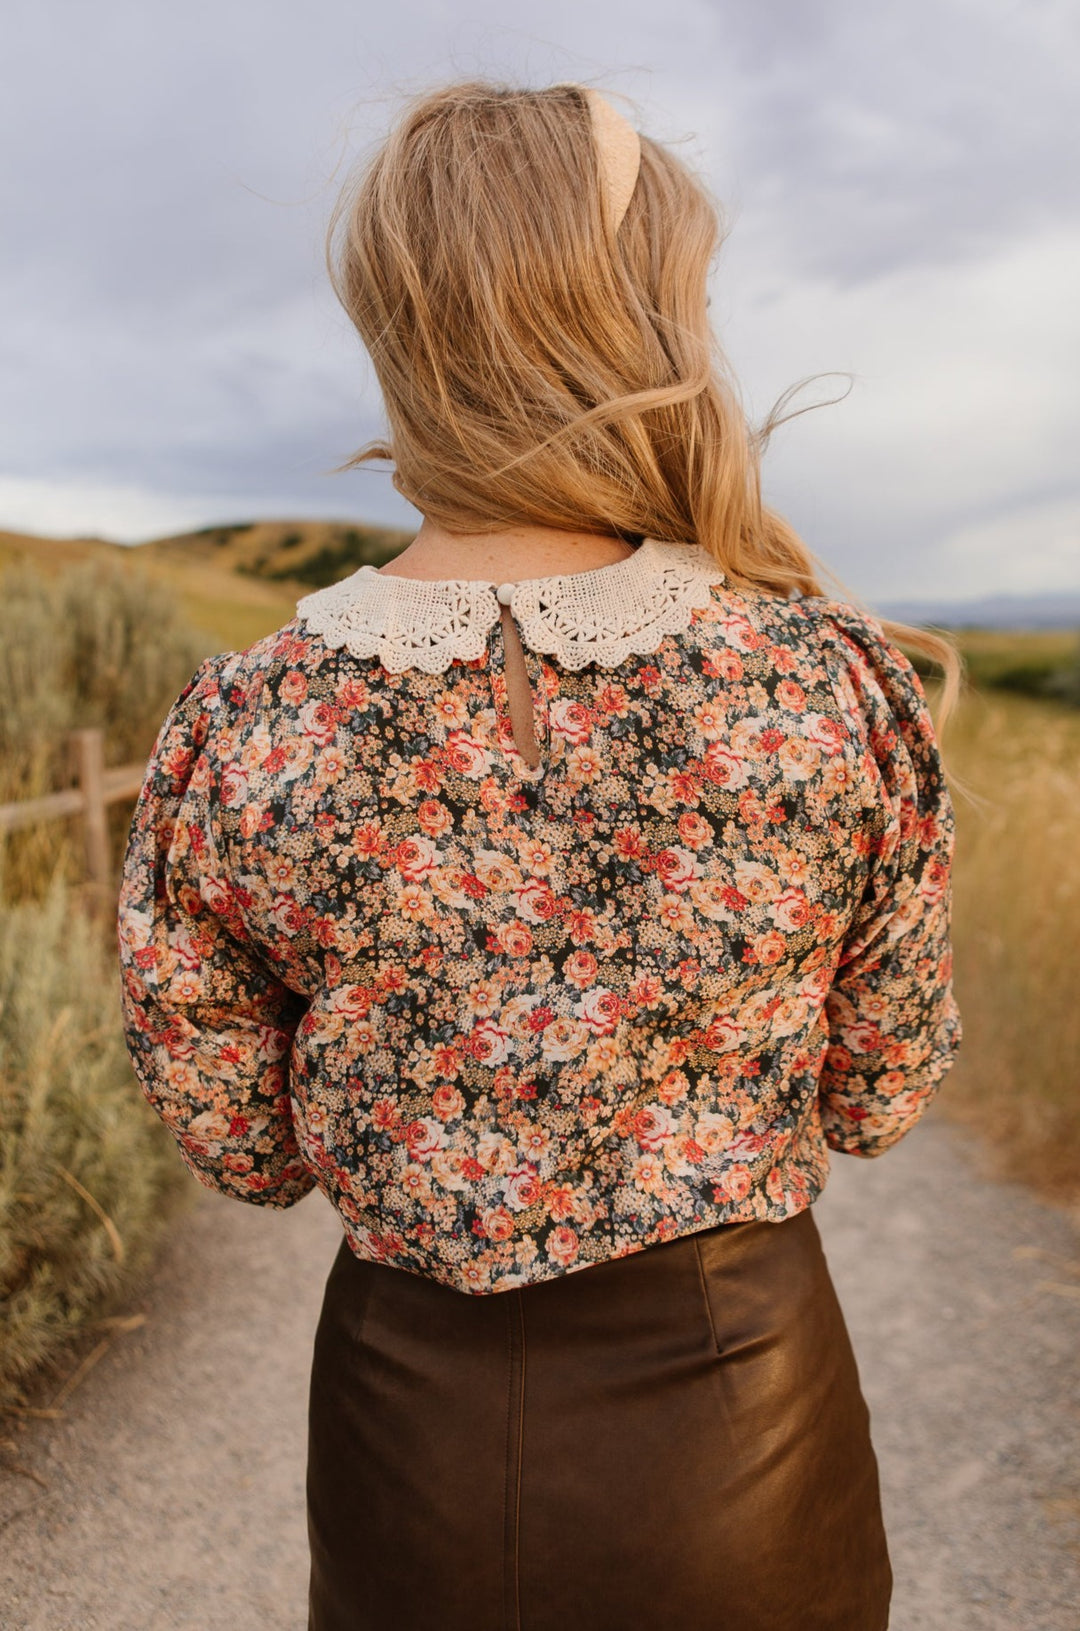 Cambridge Long Sleeve Blouse in Floral